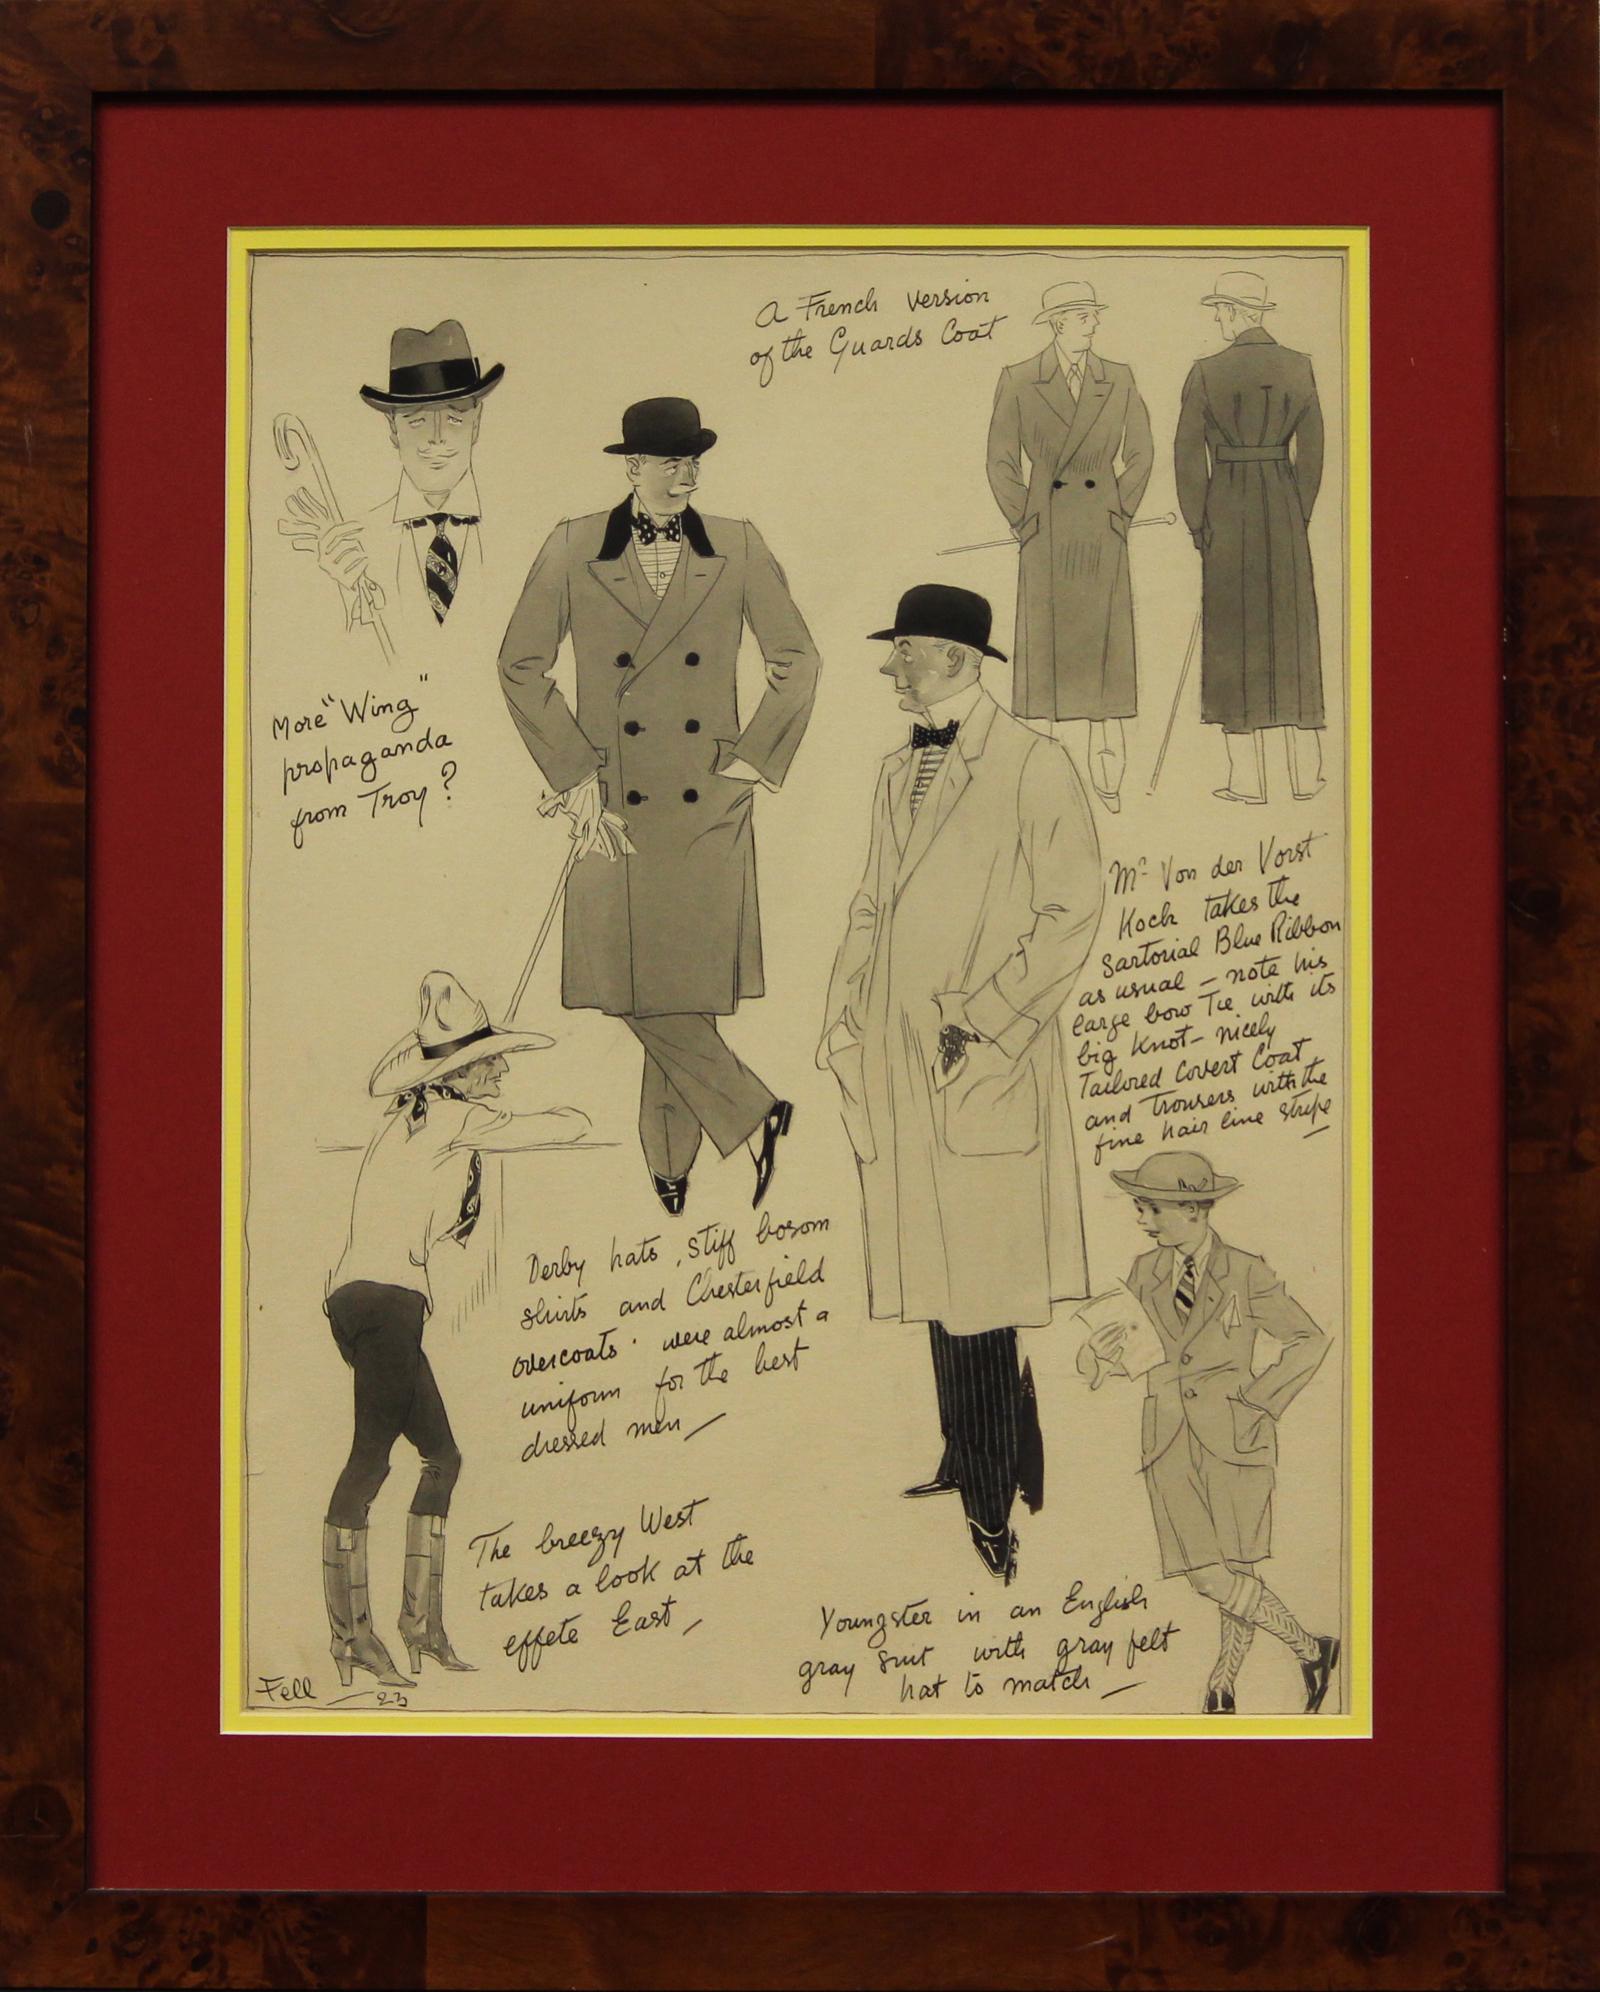 Stylish & dapper watercolour 'decoupage' vignette by 'Fell' 1923

Featuring seven English gents sporting various styles of bespoke apparel

Image Sz: 17"H x 12 3/4"W

Frame Sz: 23 1/4"H x 18 3/4"W

(04/14/1880- 11/1972)
Herbert Fell Sharp was a